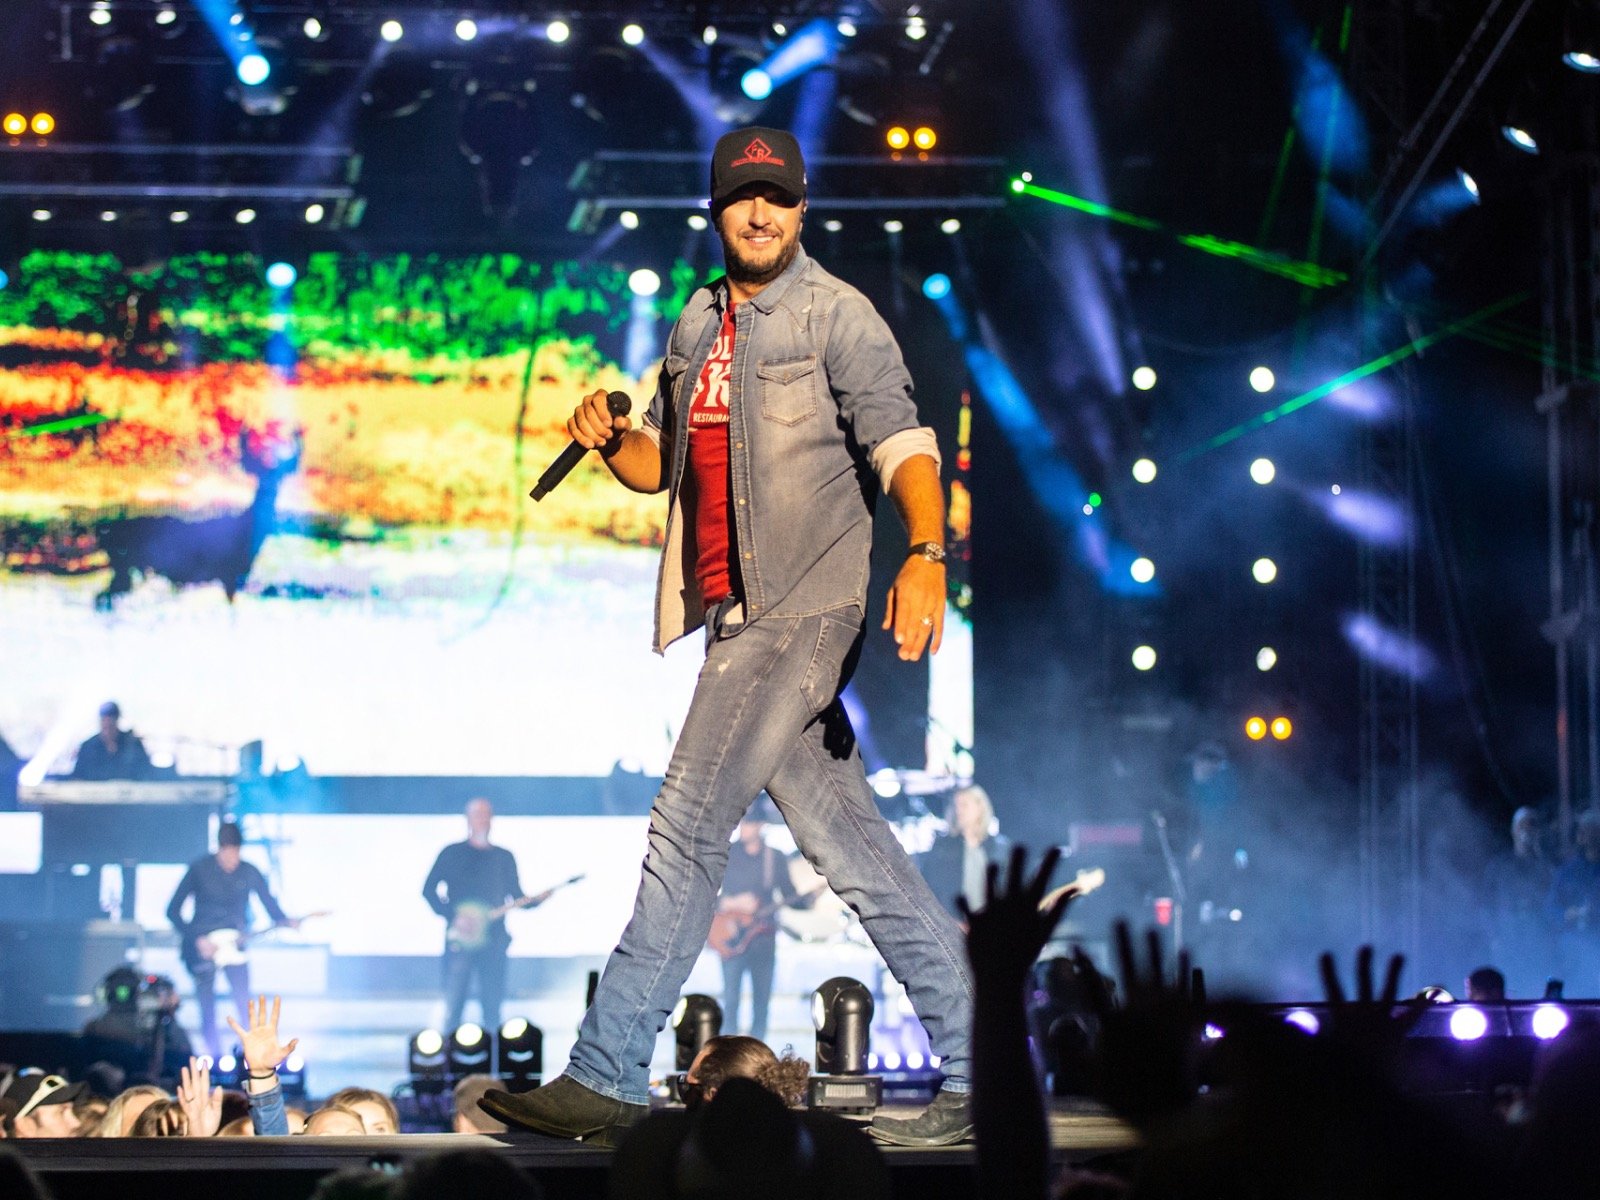 6 reasons why you shouldn't have missed Luke Bryan's Farm Tour opener